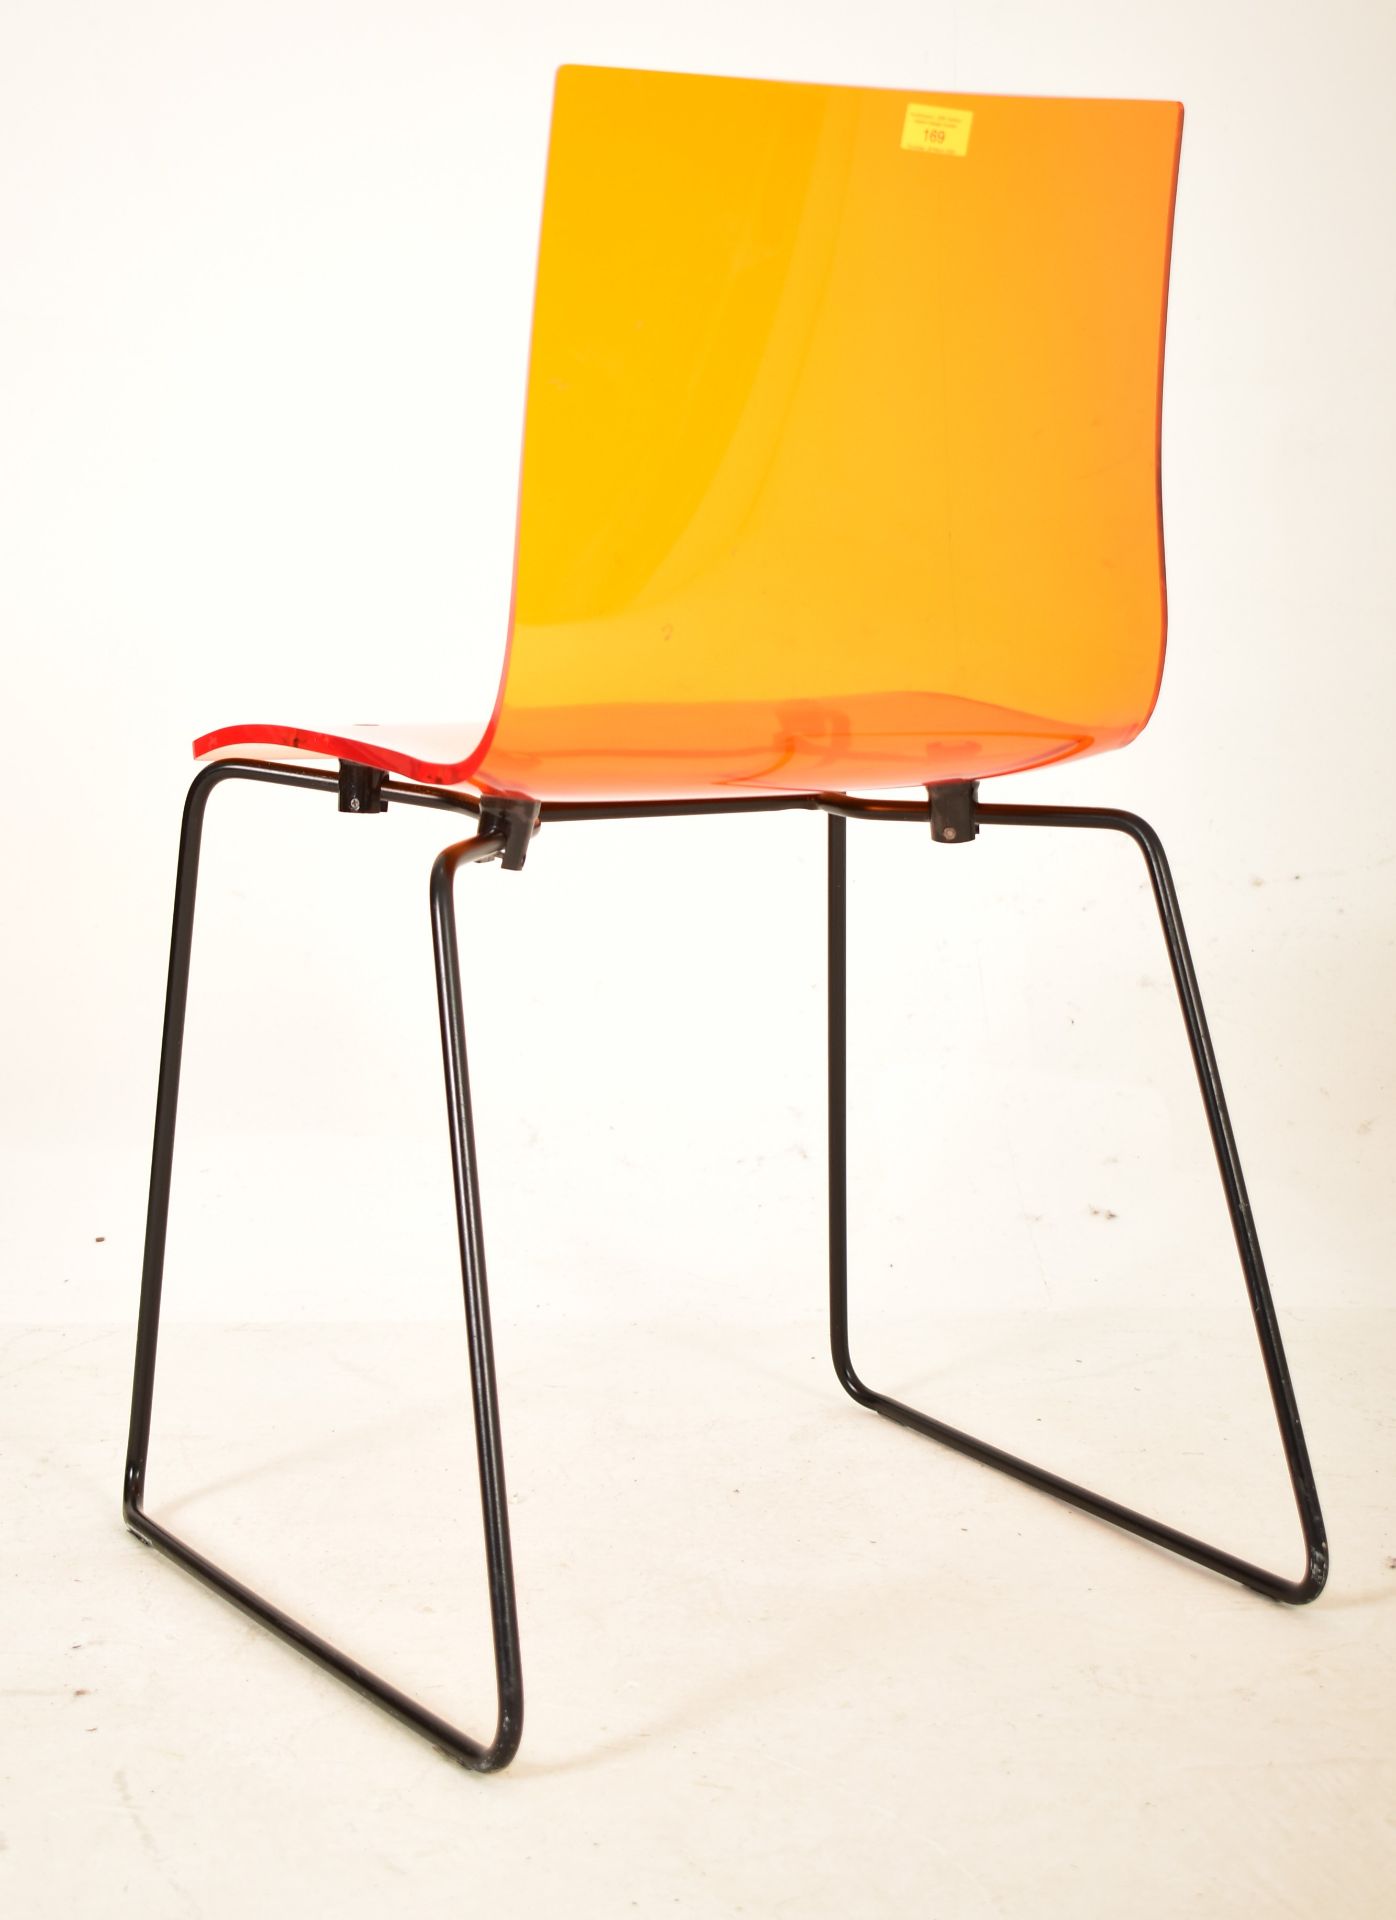 BELIEVED BO CONCEPT ACRYLIC & METAL OFFICE DESK CHAIR - Image 4 of 4